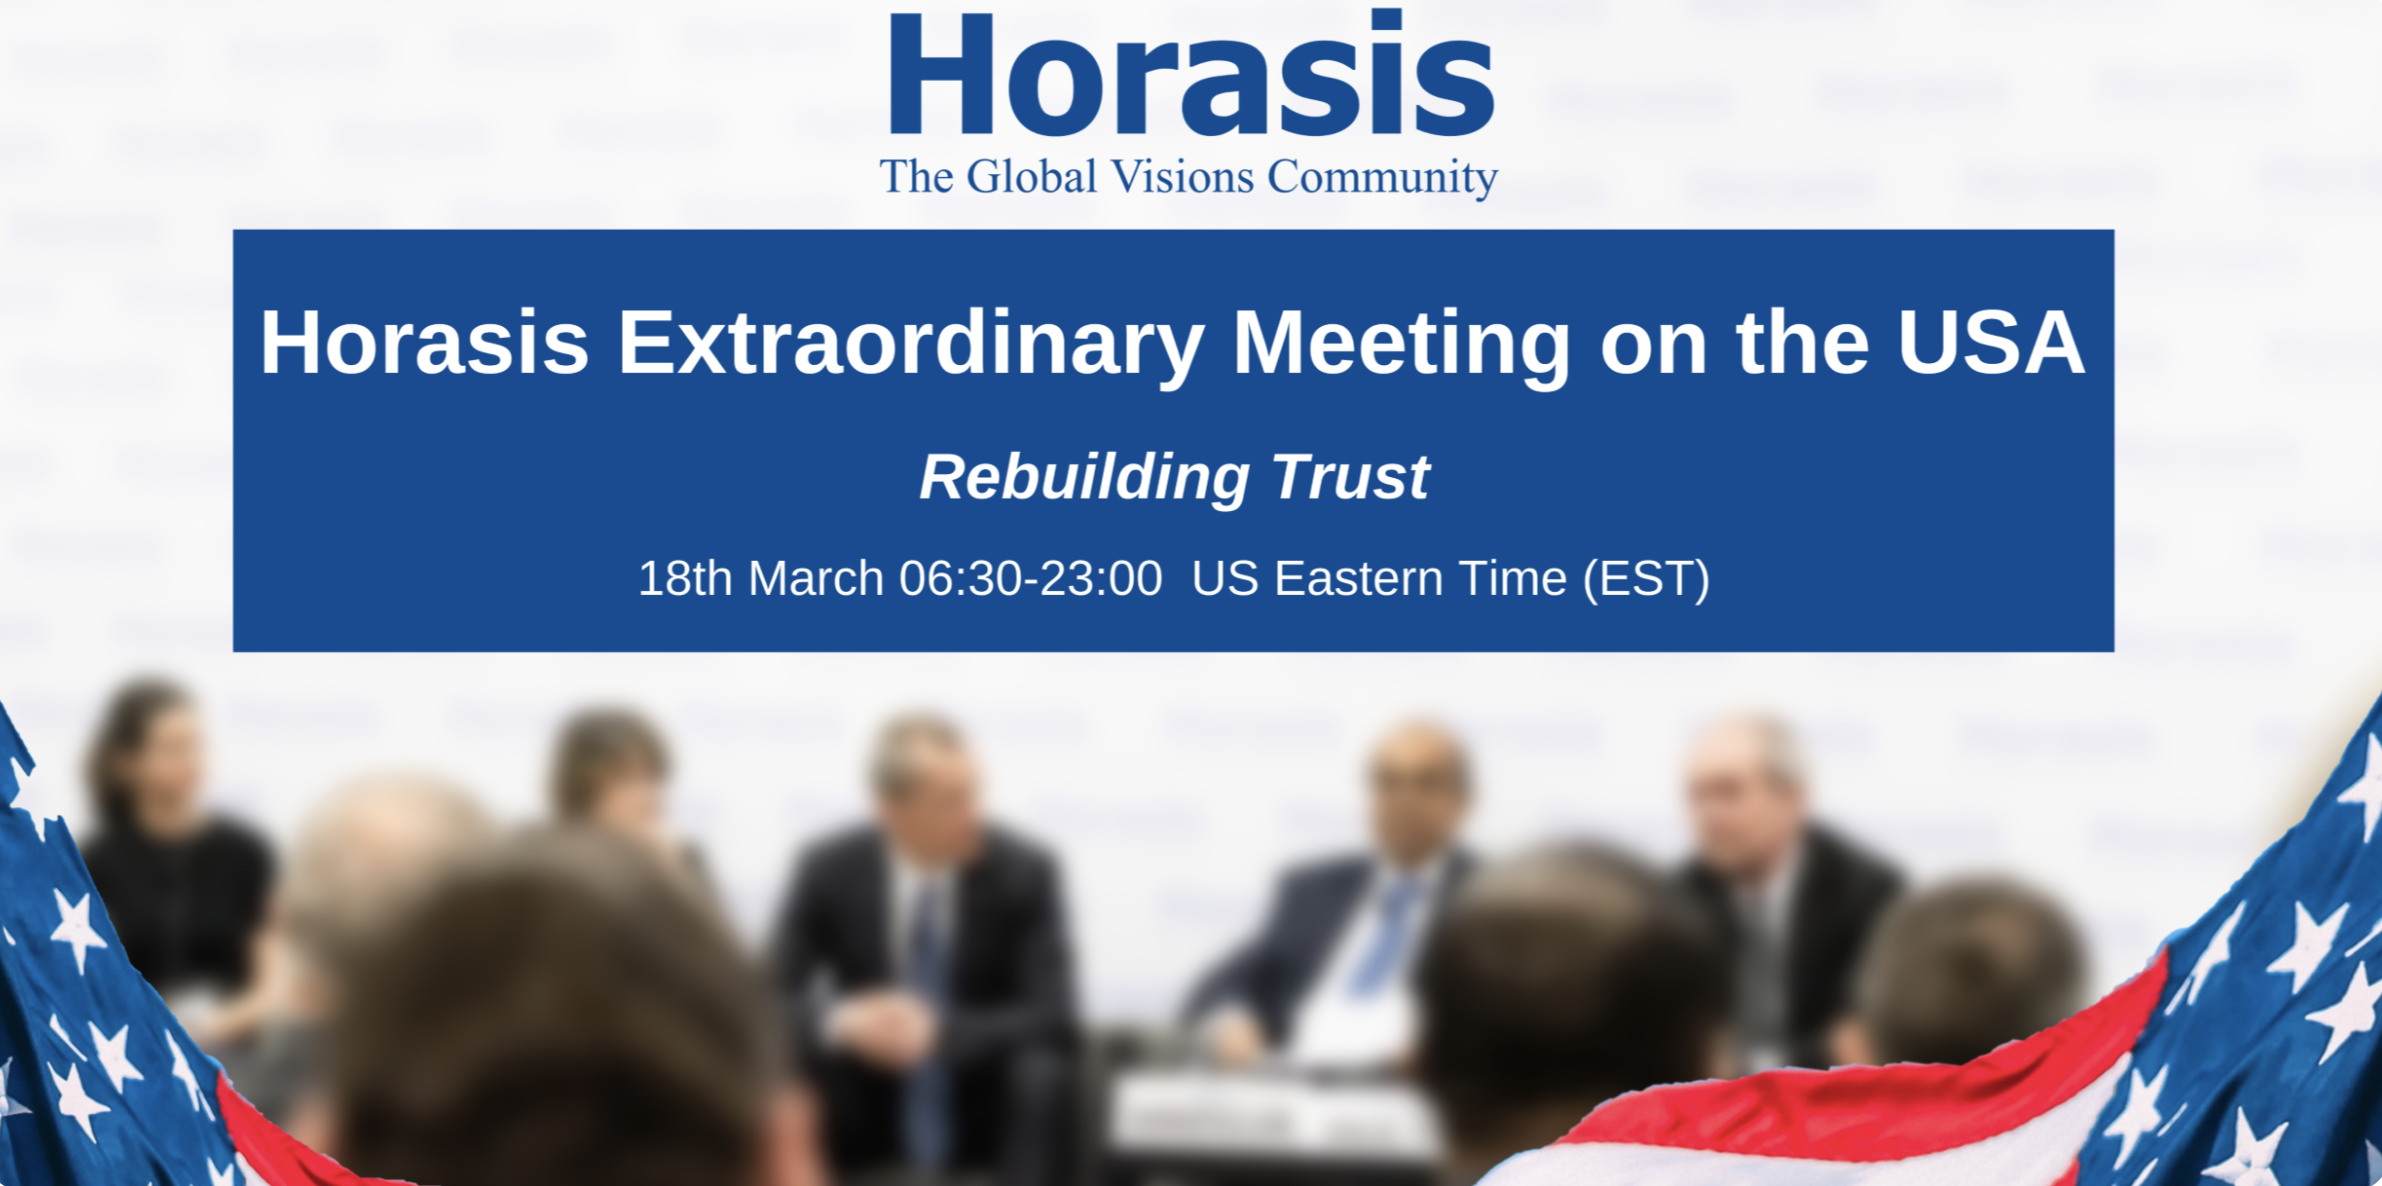 The Corporate View Of The Next Black Swan Event, Horasis Extraordinary Meeting On The USA, 2021